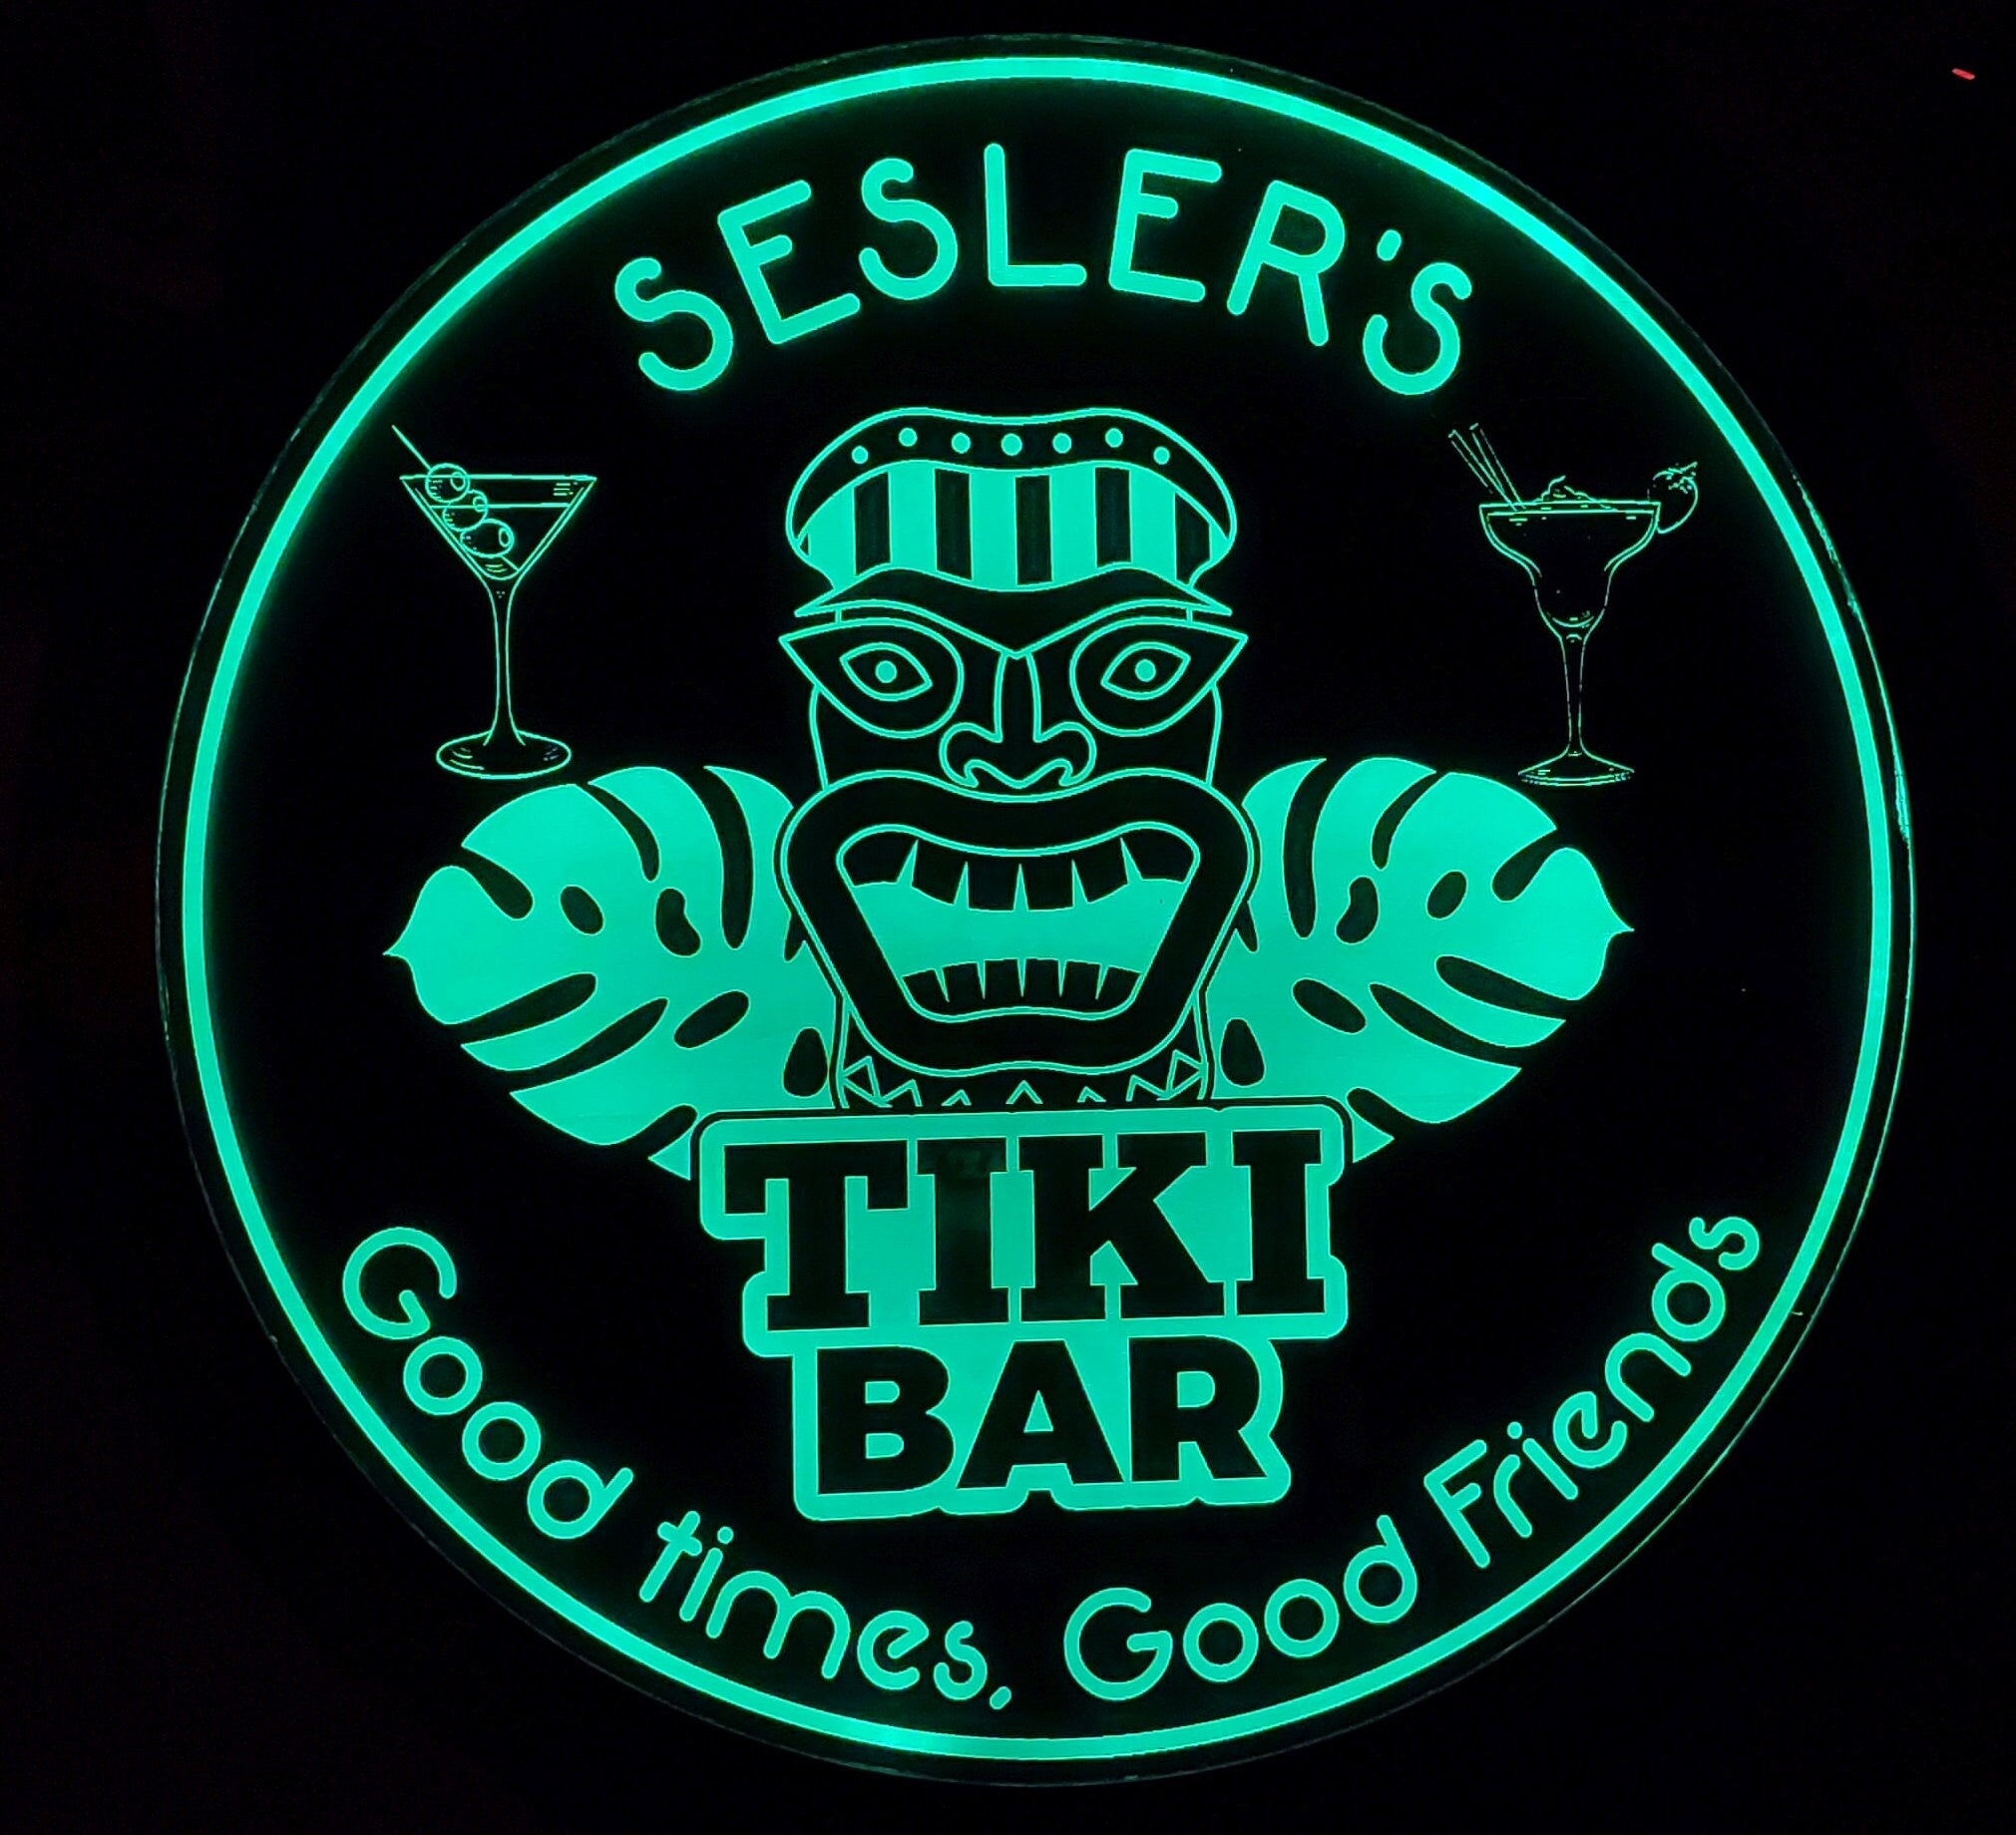 Custom Tiki Bar Sign LED Wall Sign Neon Like - Color Changing Remote Control - 5 Sizes Made in USA Free Shipping